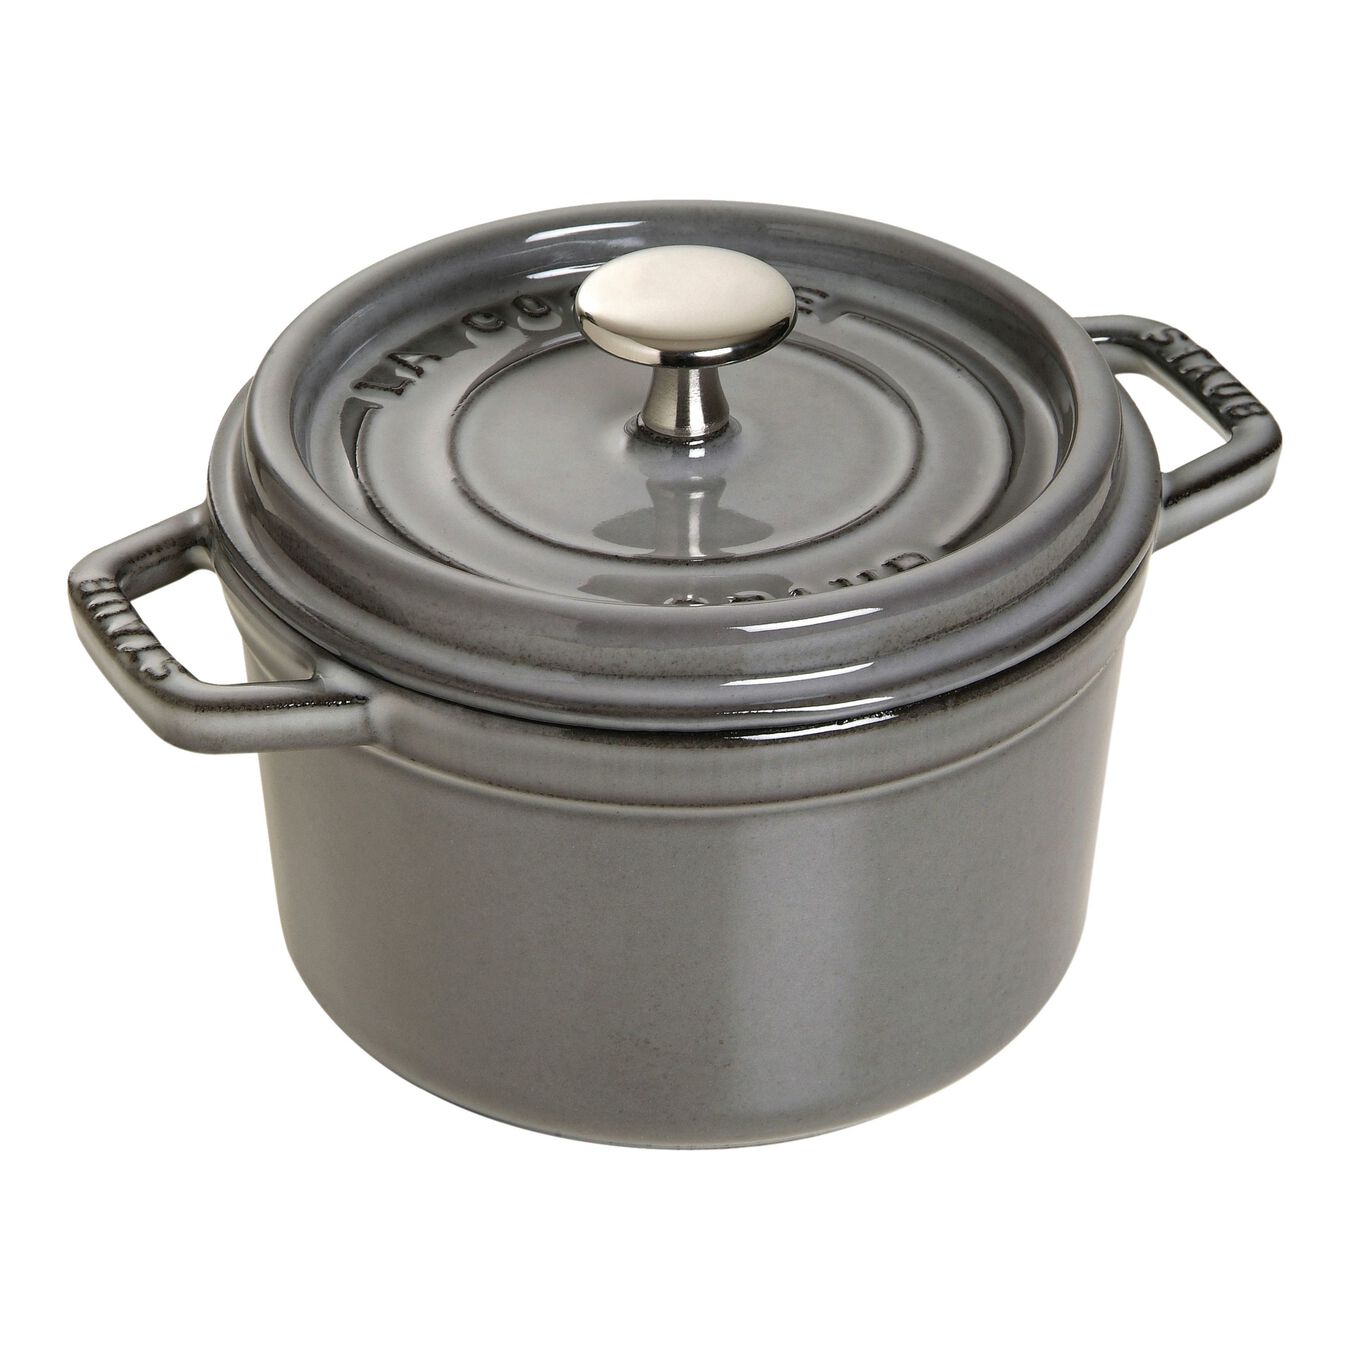 800 ml cast iron round Cocotte, graphite-grey - Visual Imperfections,,large 1